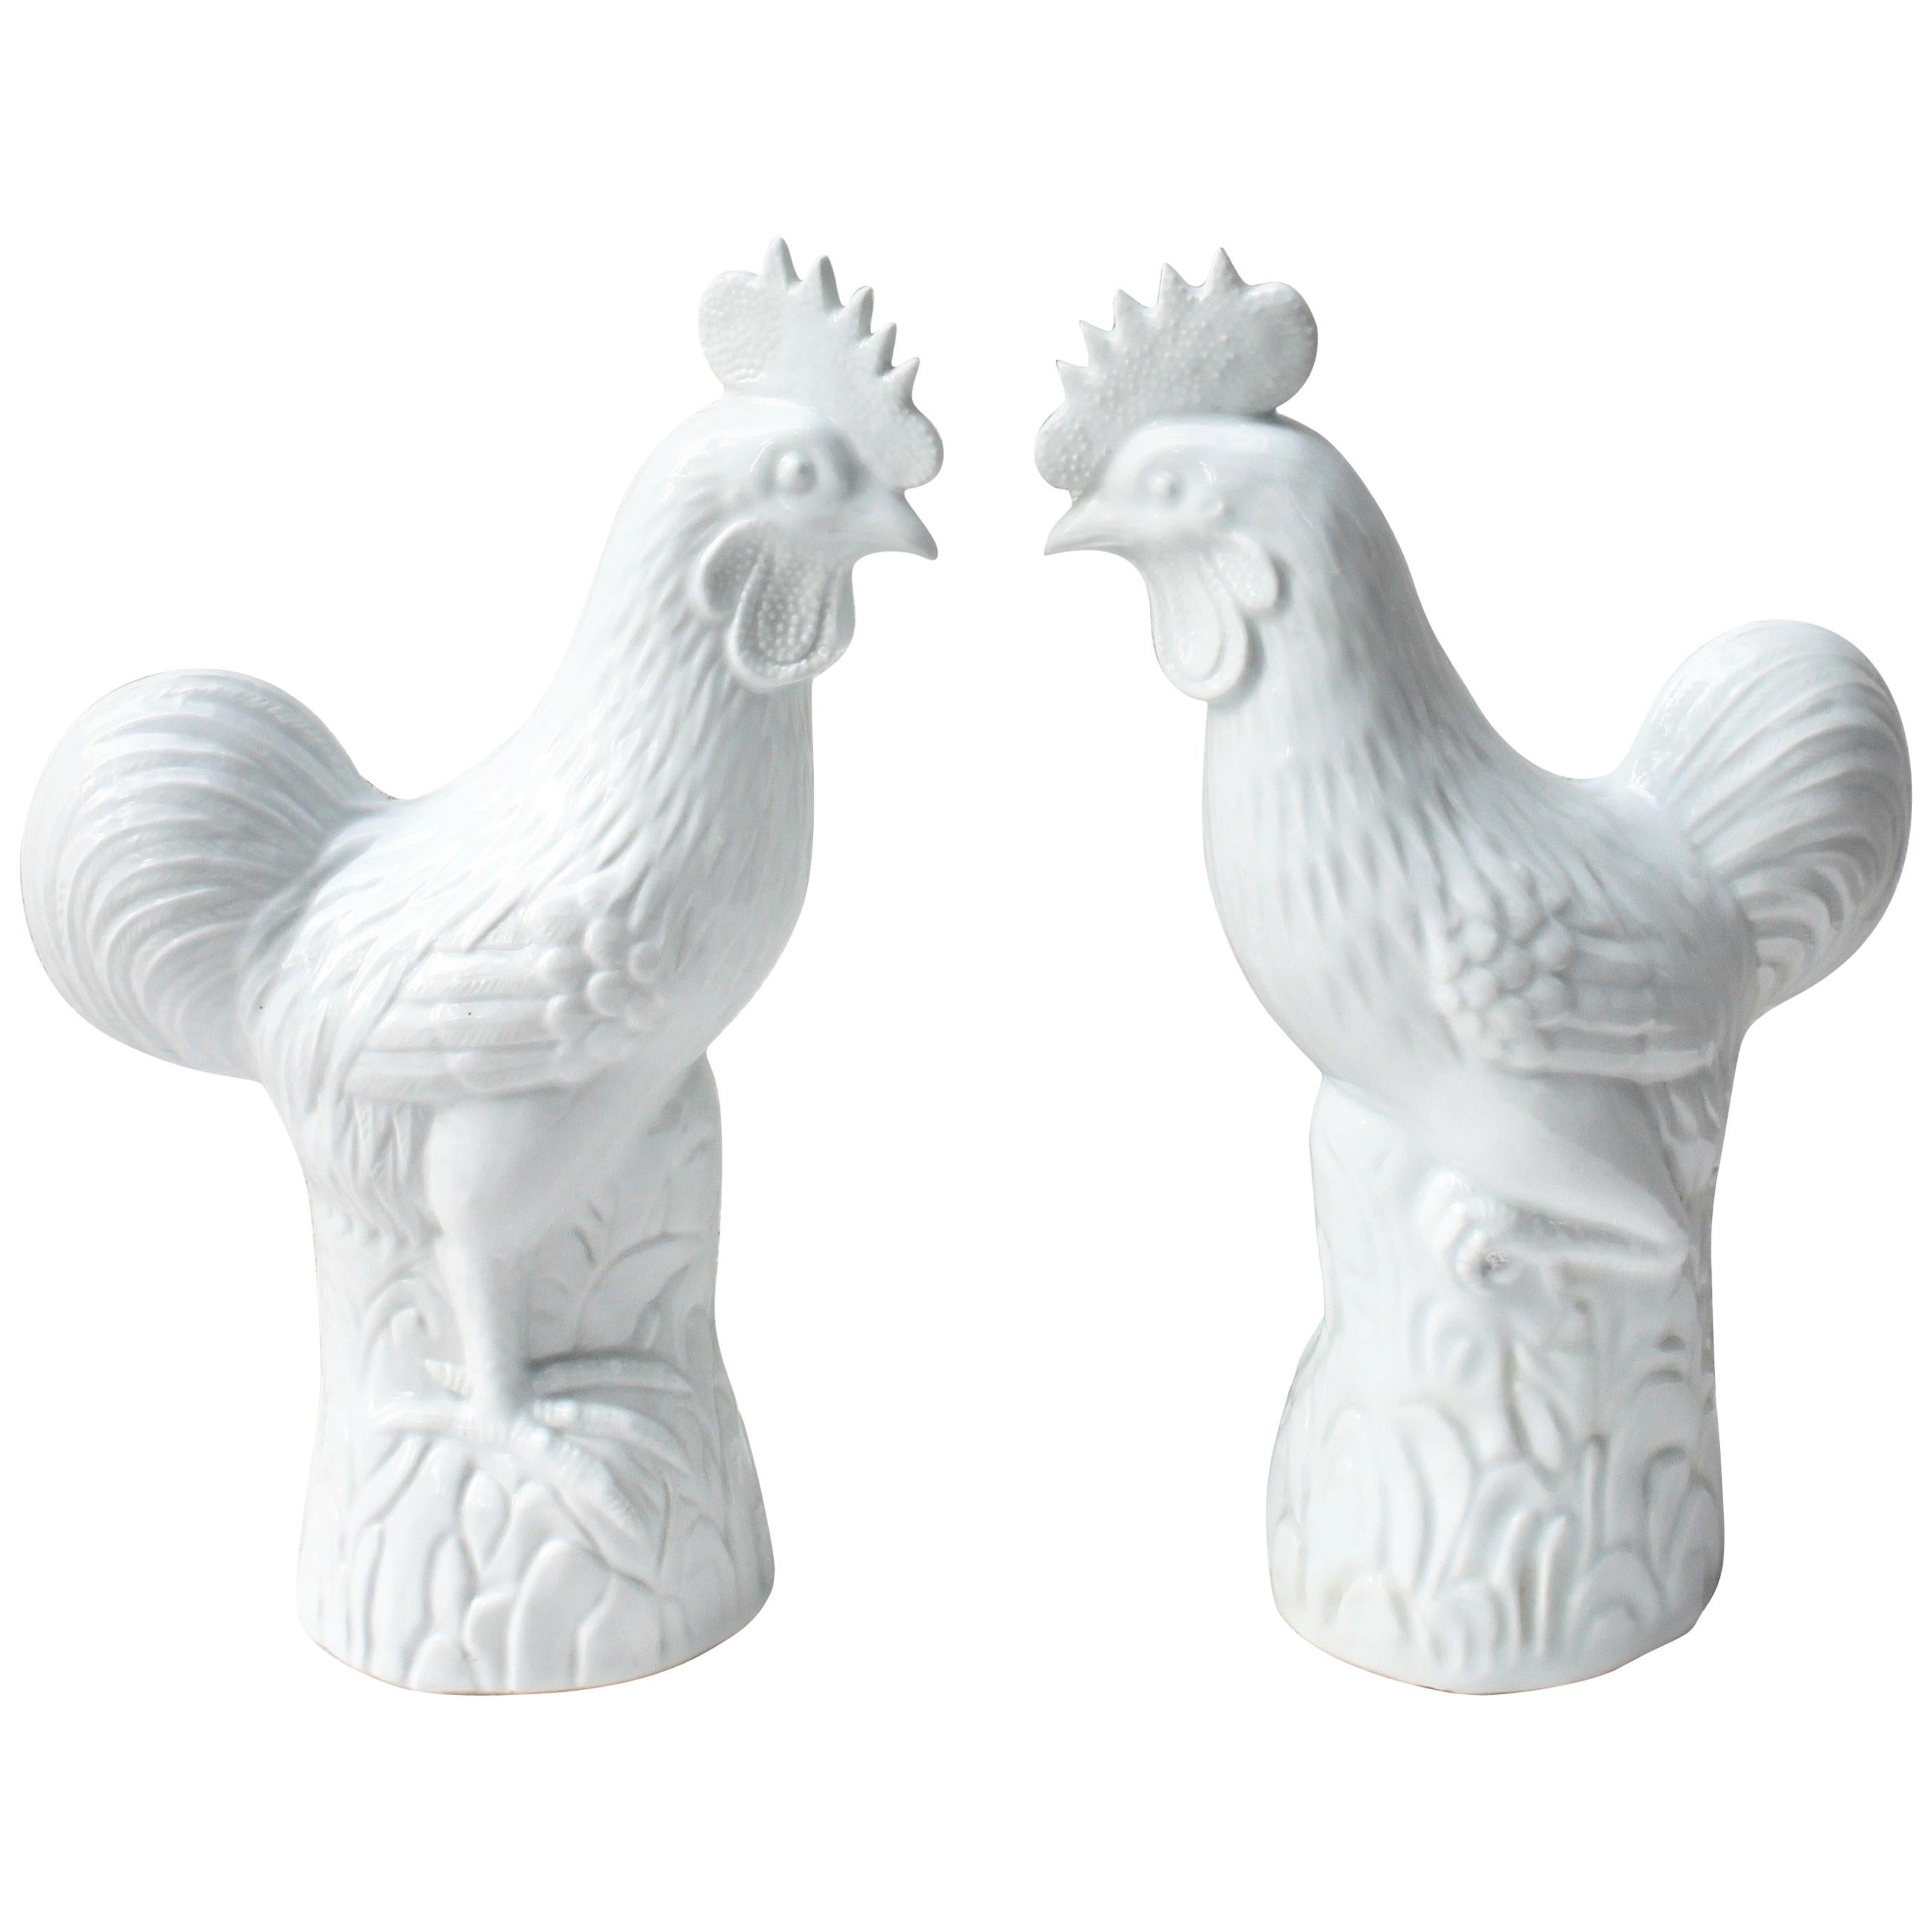 Pair of White Ceramic Roosters